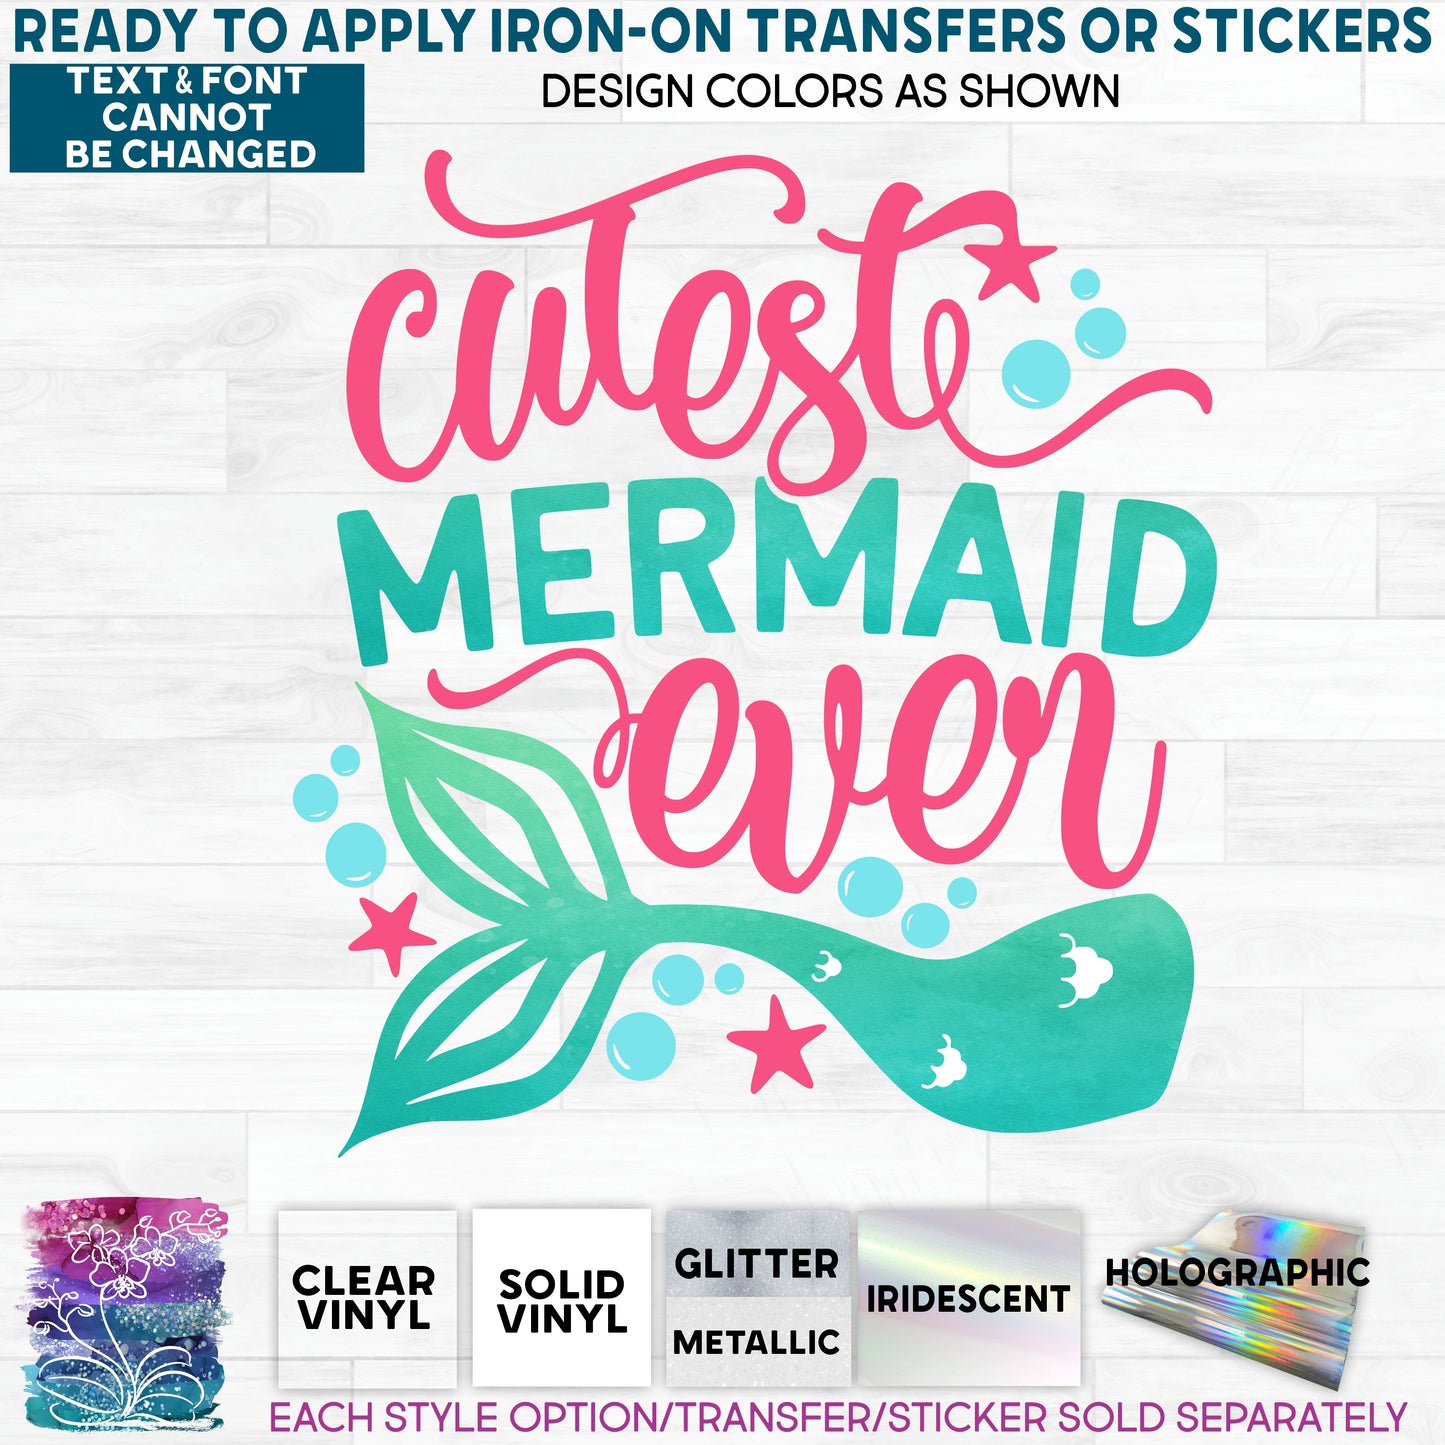 (s198-5E1) Cutest Mermaid Ever Pink Green Watercolor Glitter or Vinyl Iron-On Transfer or Sticker